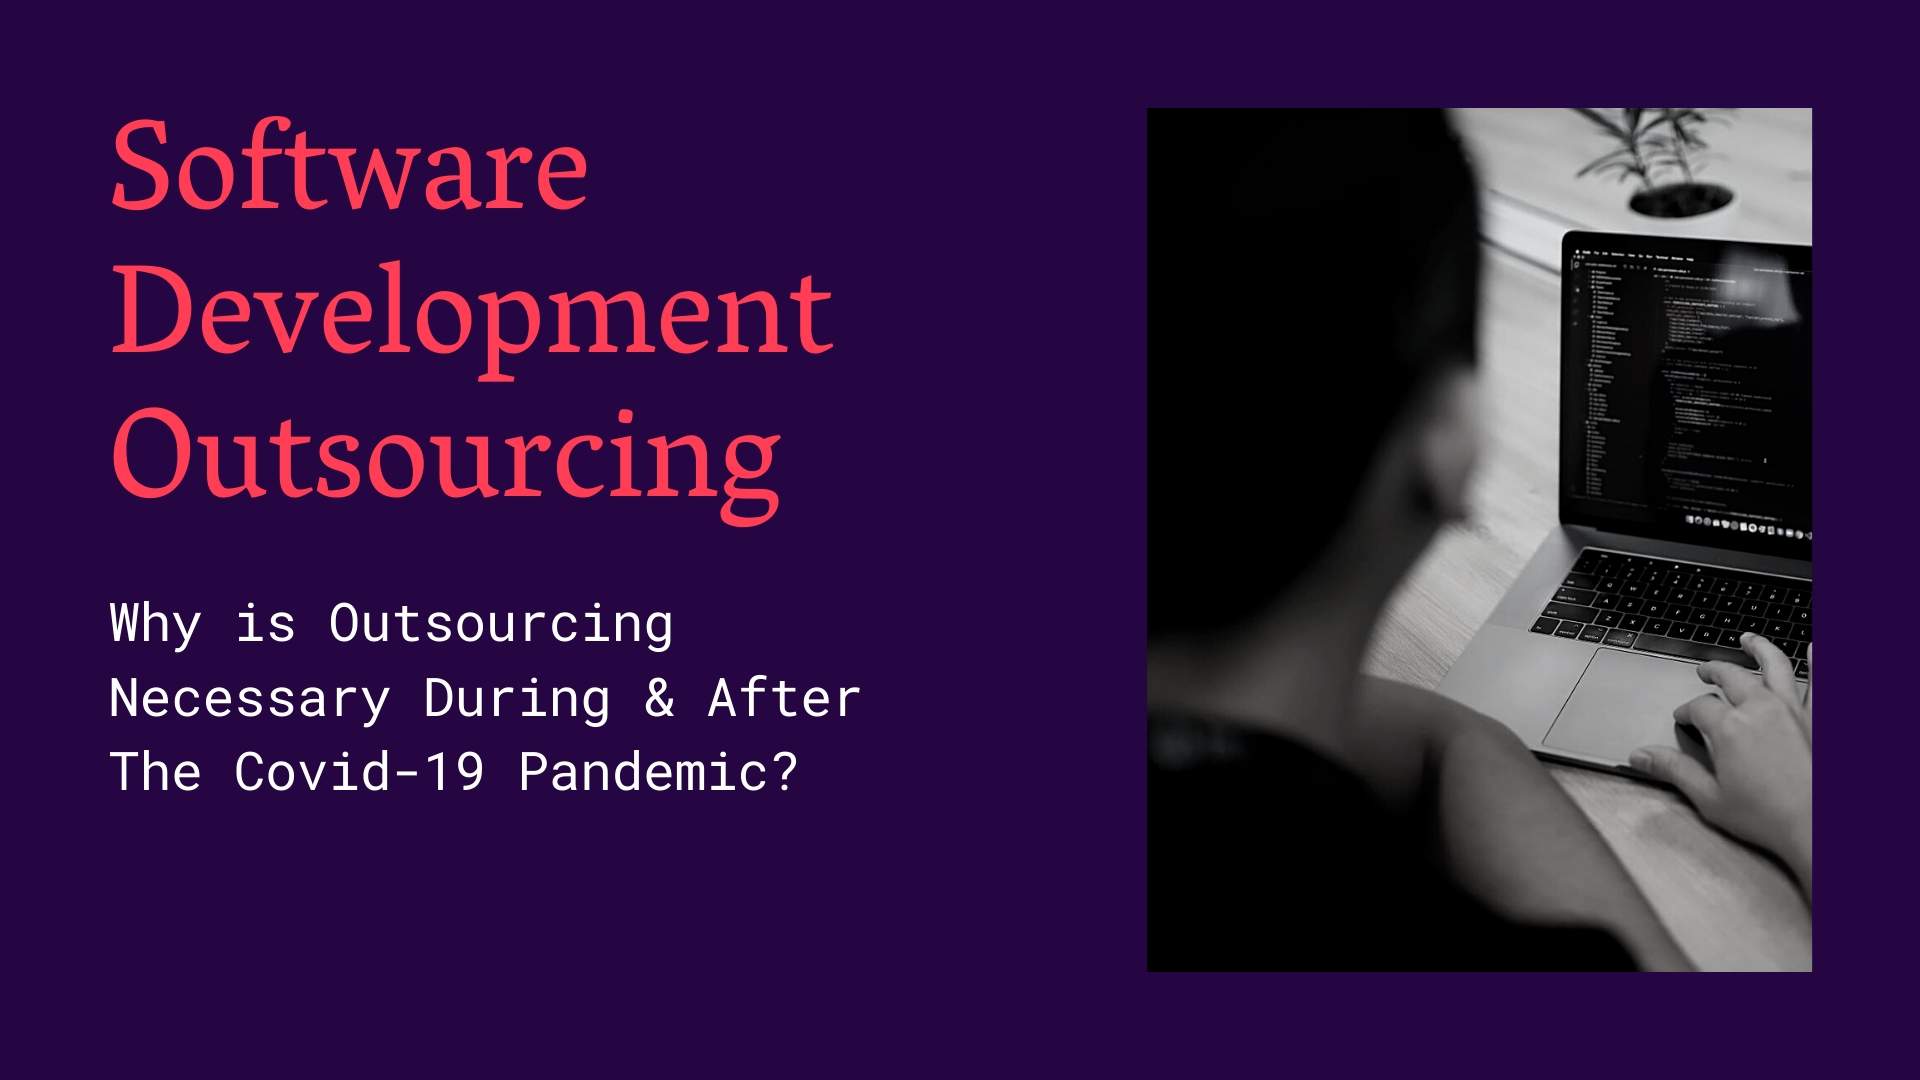 Why is Software Development Outsourcing Necessary During & After The Pandemic?